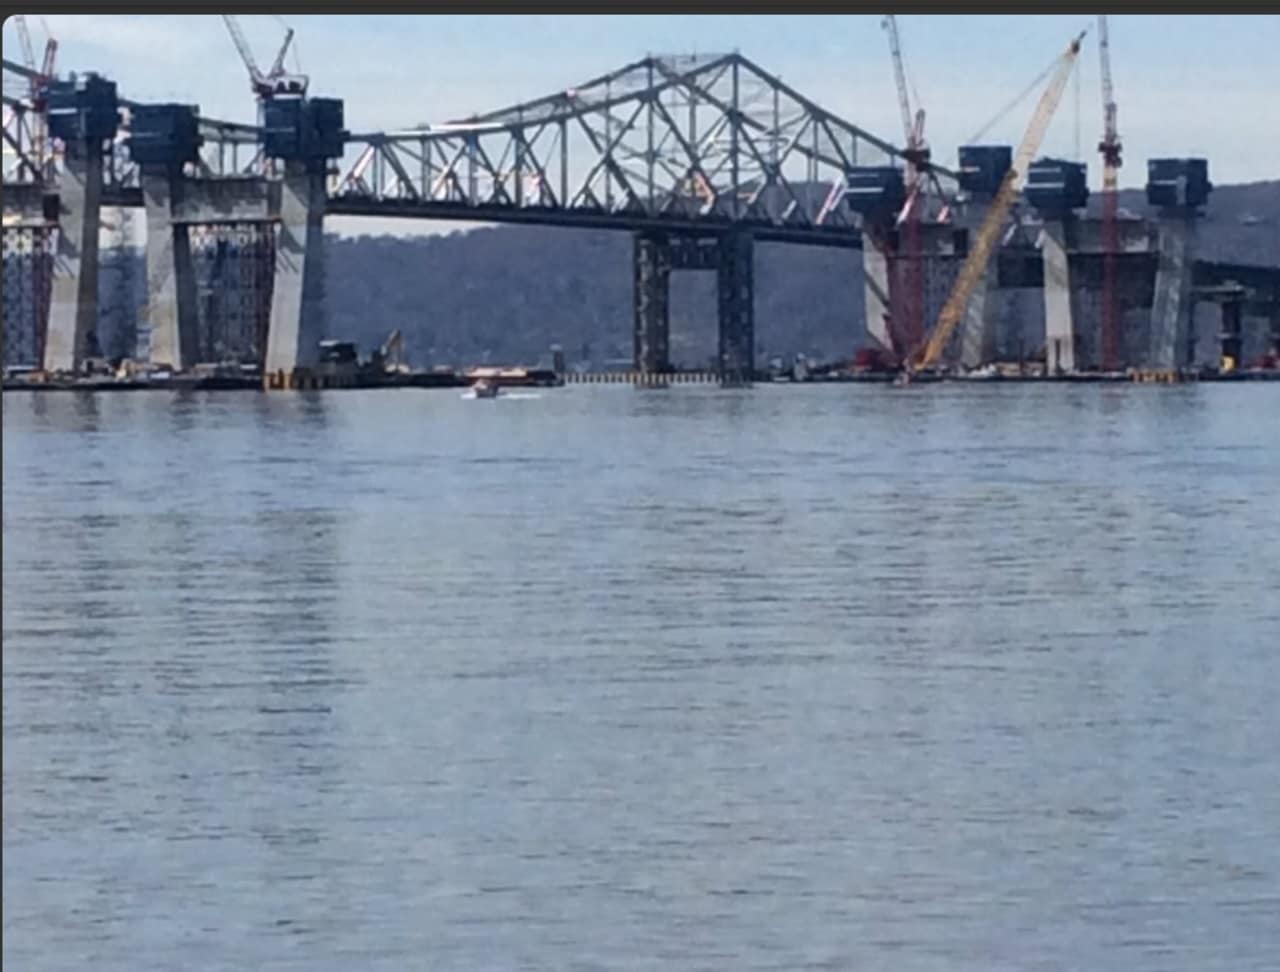 Crews will use a mammoth salvage crane to try to raise the tugboat that crashed into a barge near the Tappan Zee Bridge project, killing three crew members. The bodies of two of the victims have been recovered; the third is still inside the vessel.